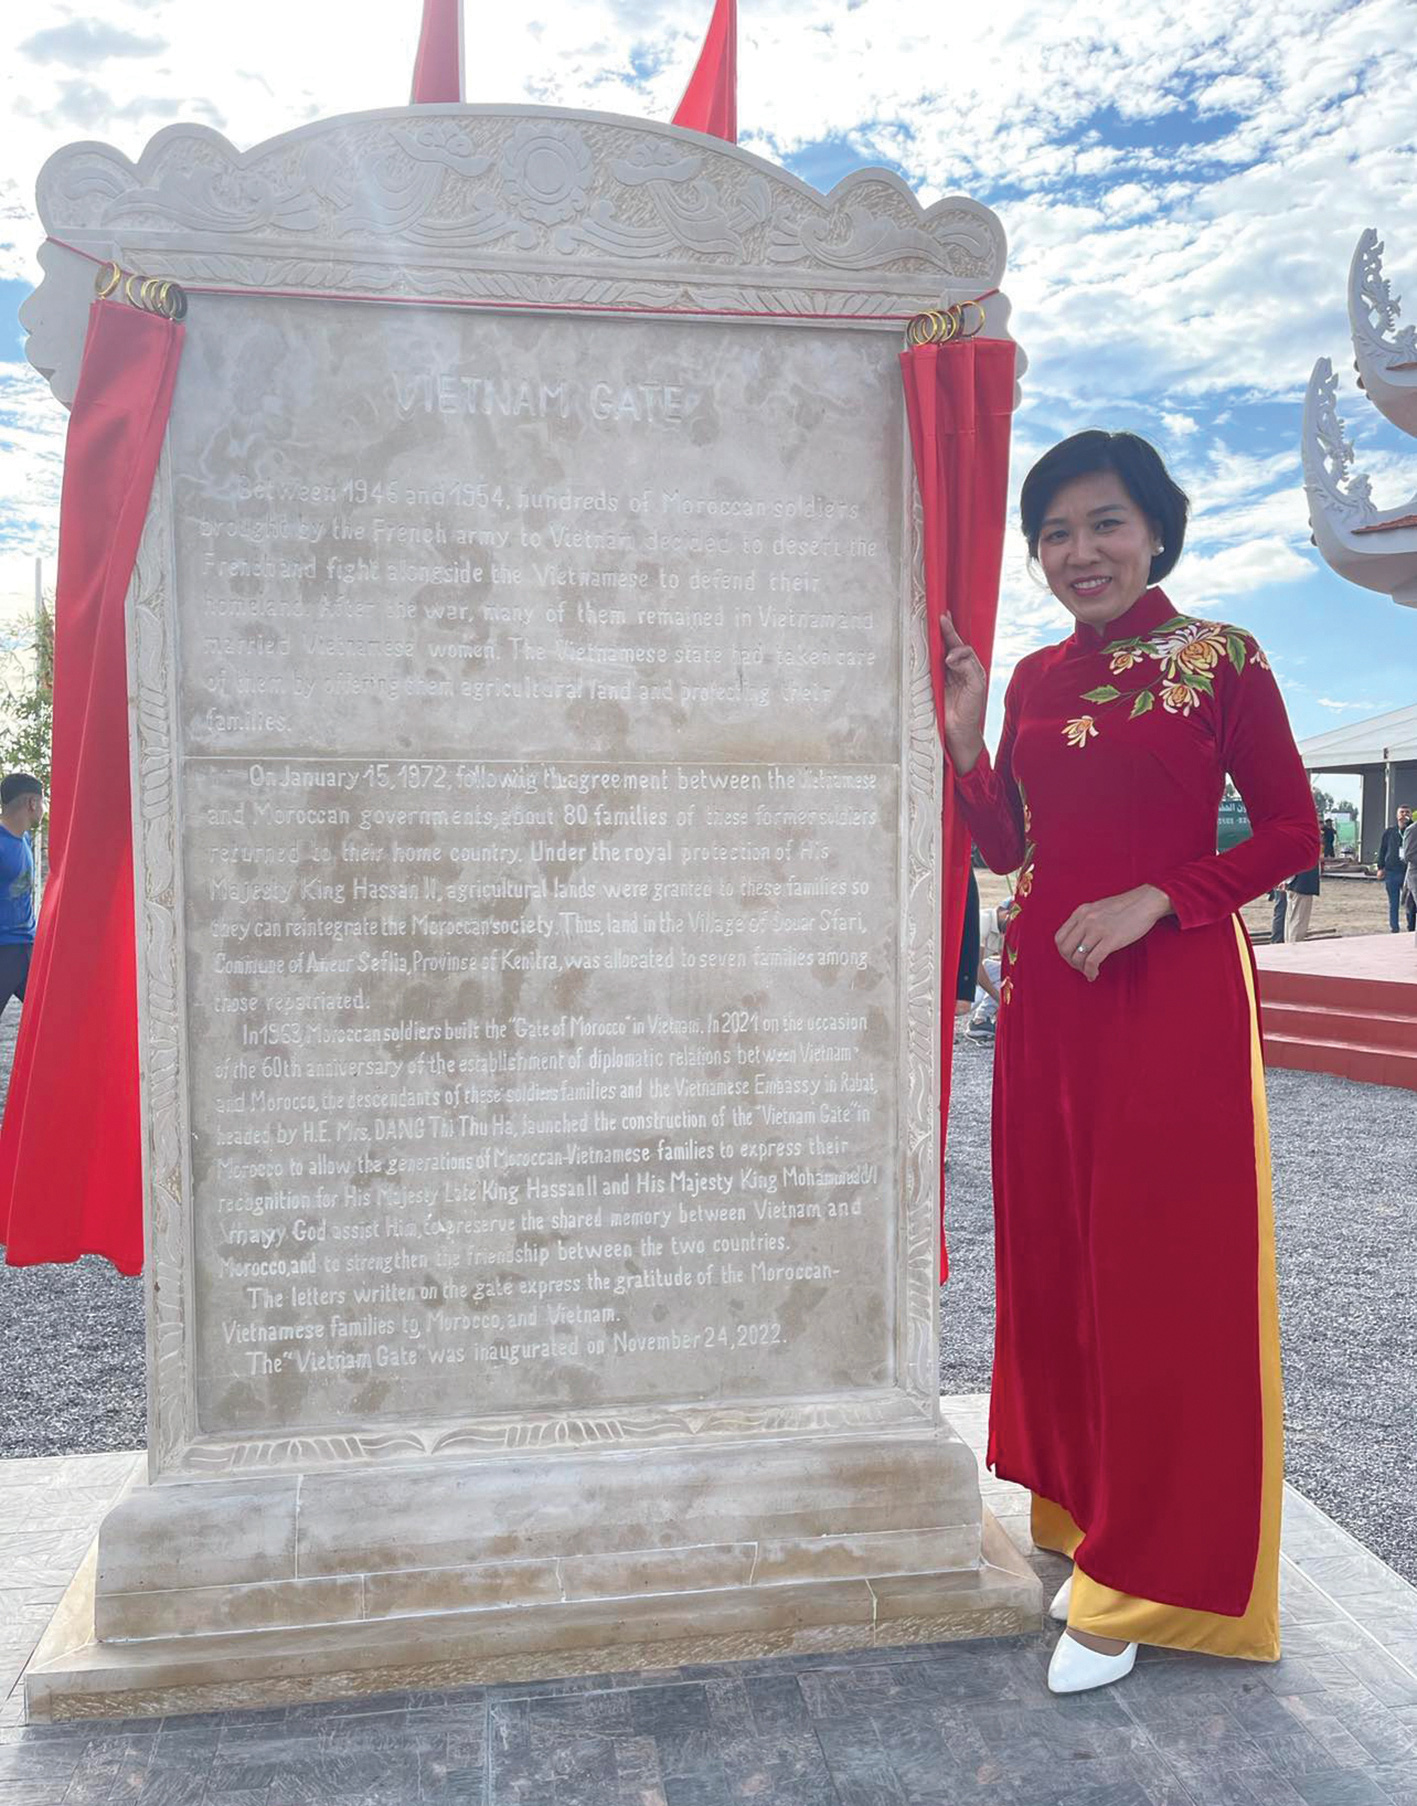 Vietnamese Ambassador to Morocco Dang Thi Thu Ha poses next to the stele explaining the story of the Vietnam gate in Morocco. Photo: Supplied